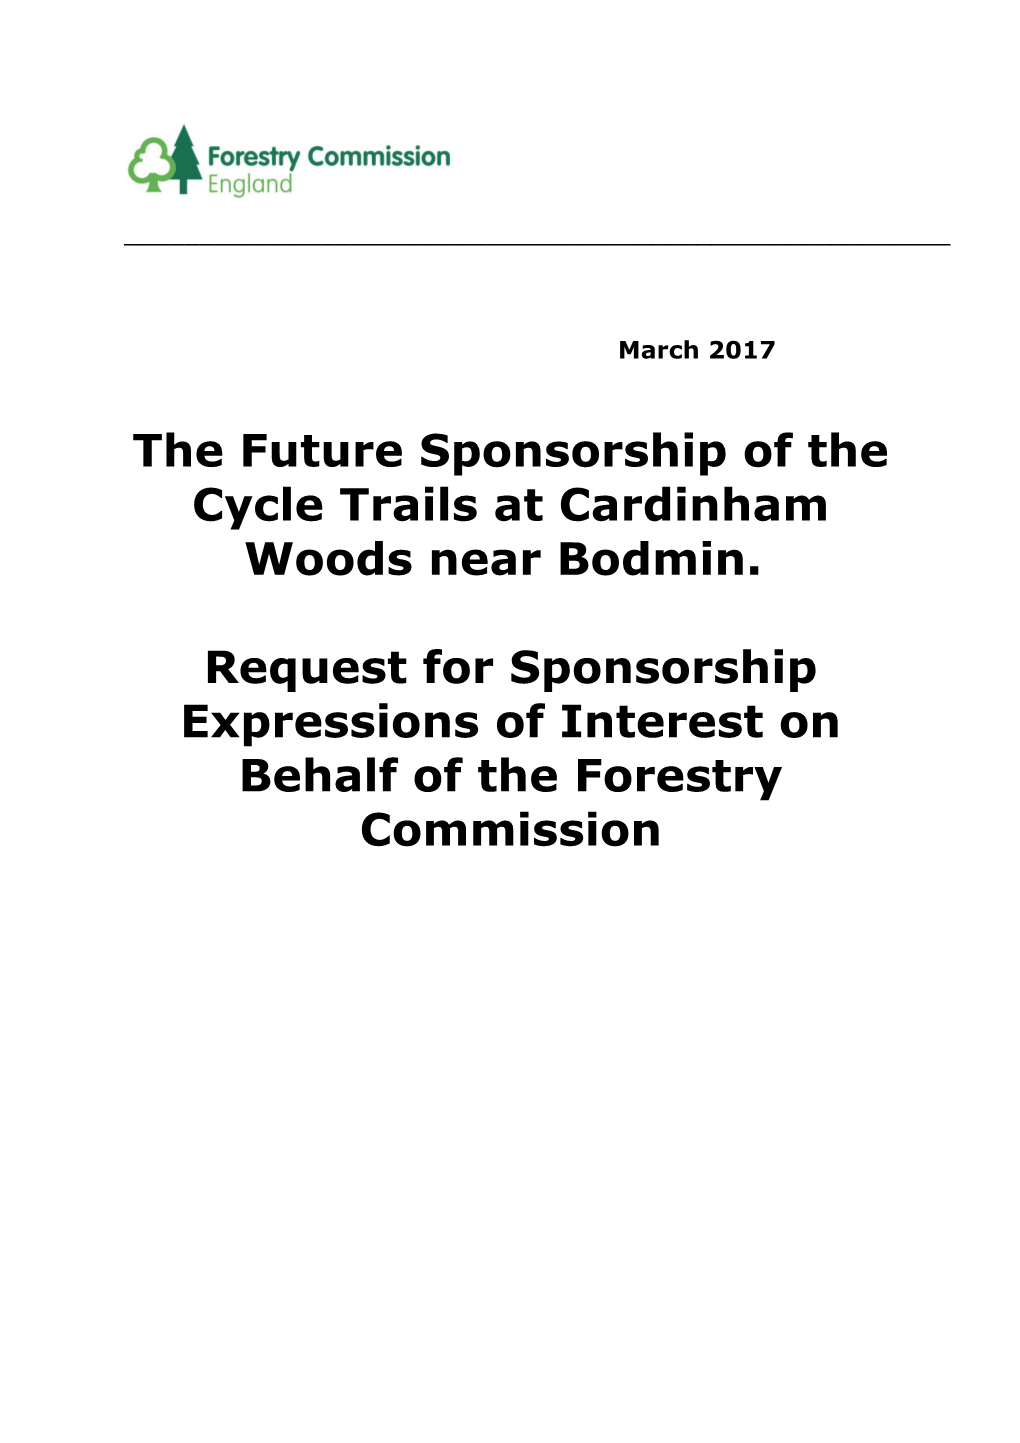 The Future Sponsorship of the Cycle Trails at Cardinham Woods Near Bodmin